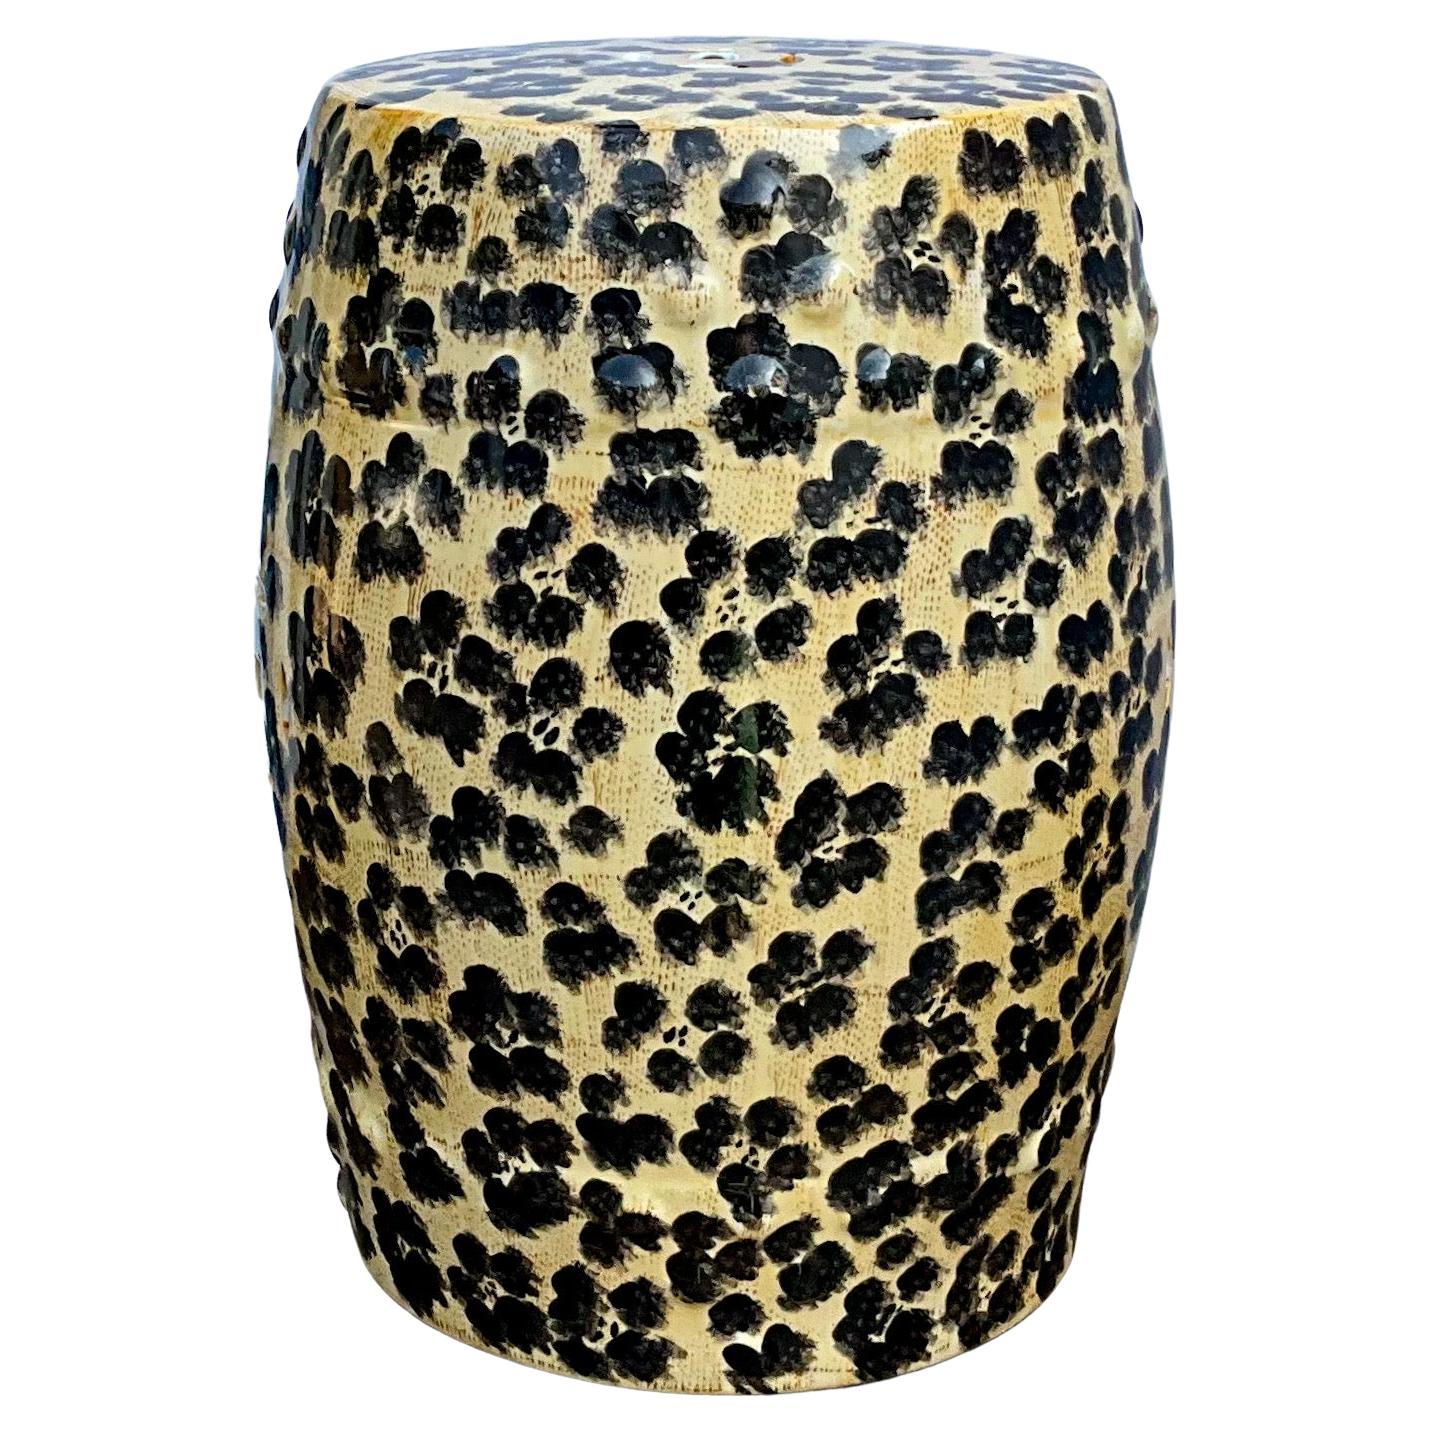 This is a fun accent piece! This is a ceramic leopard garden stool or side table. It is not terribly old and in perfect condition.